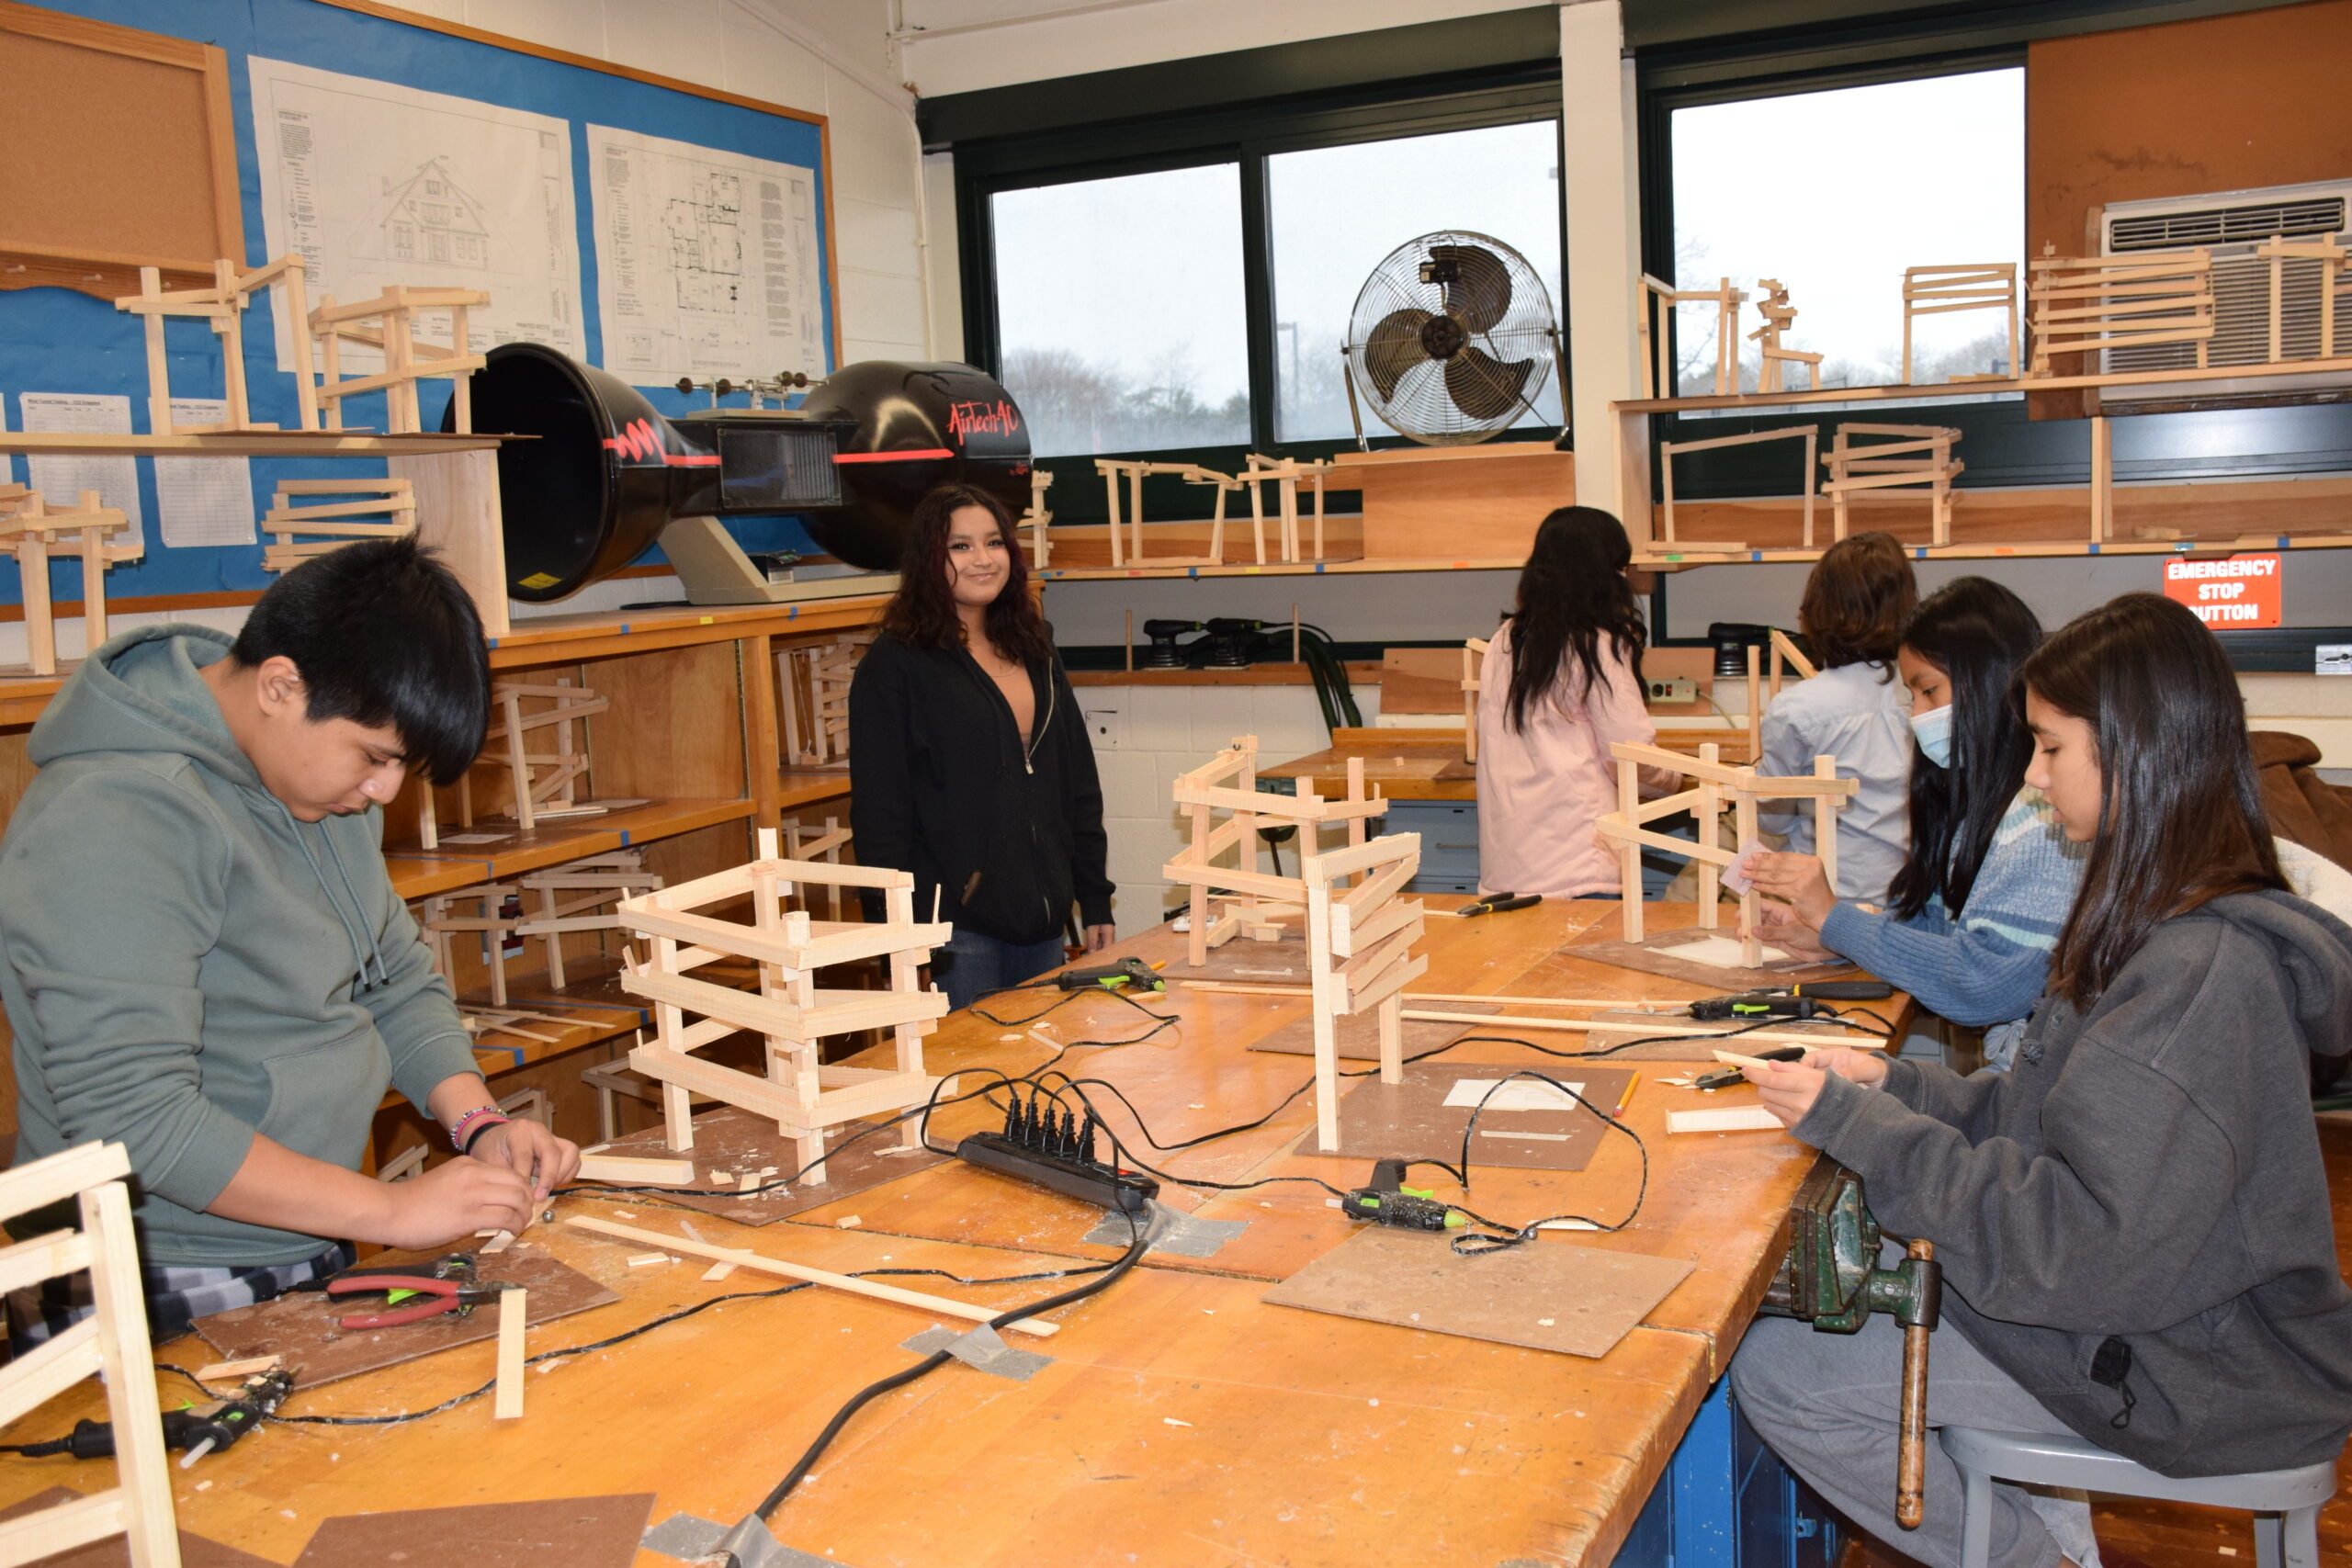 Seventh grade Southampton Intermediate School students in James Nolan’s technology class are using their engineering skills to construct a Rube Goldberg-style marble run. For the project, students are cutting and piecing together wood with the goal of inventing the longest run a marble can travel and successfully complete. COURTESY SOUTHAMPTON SCHOOL DISTRICT